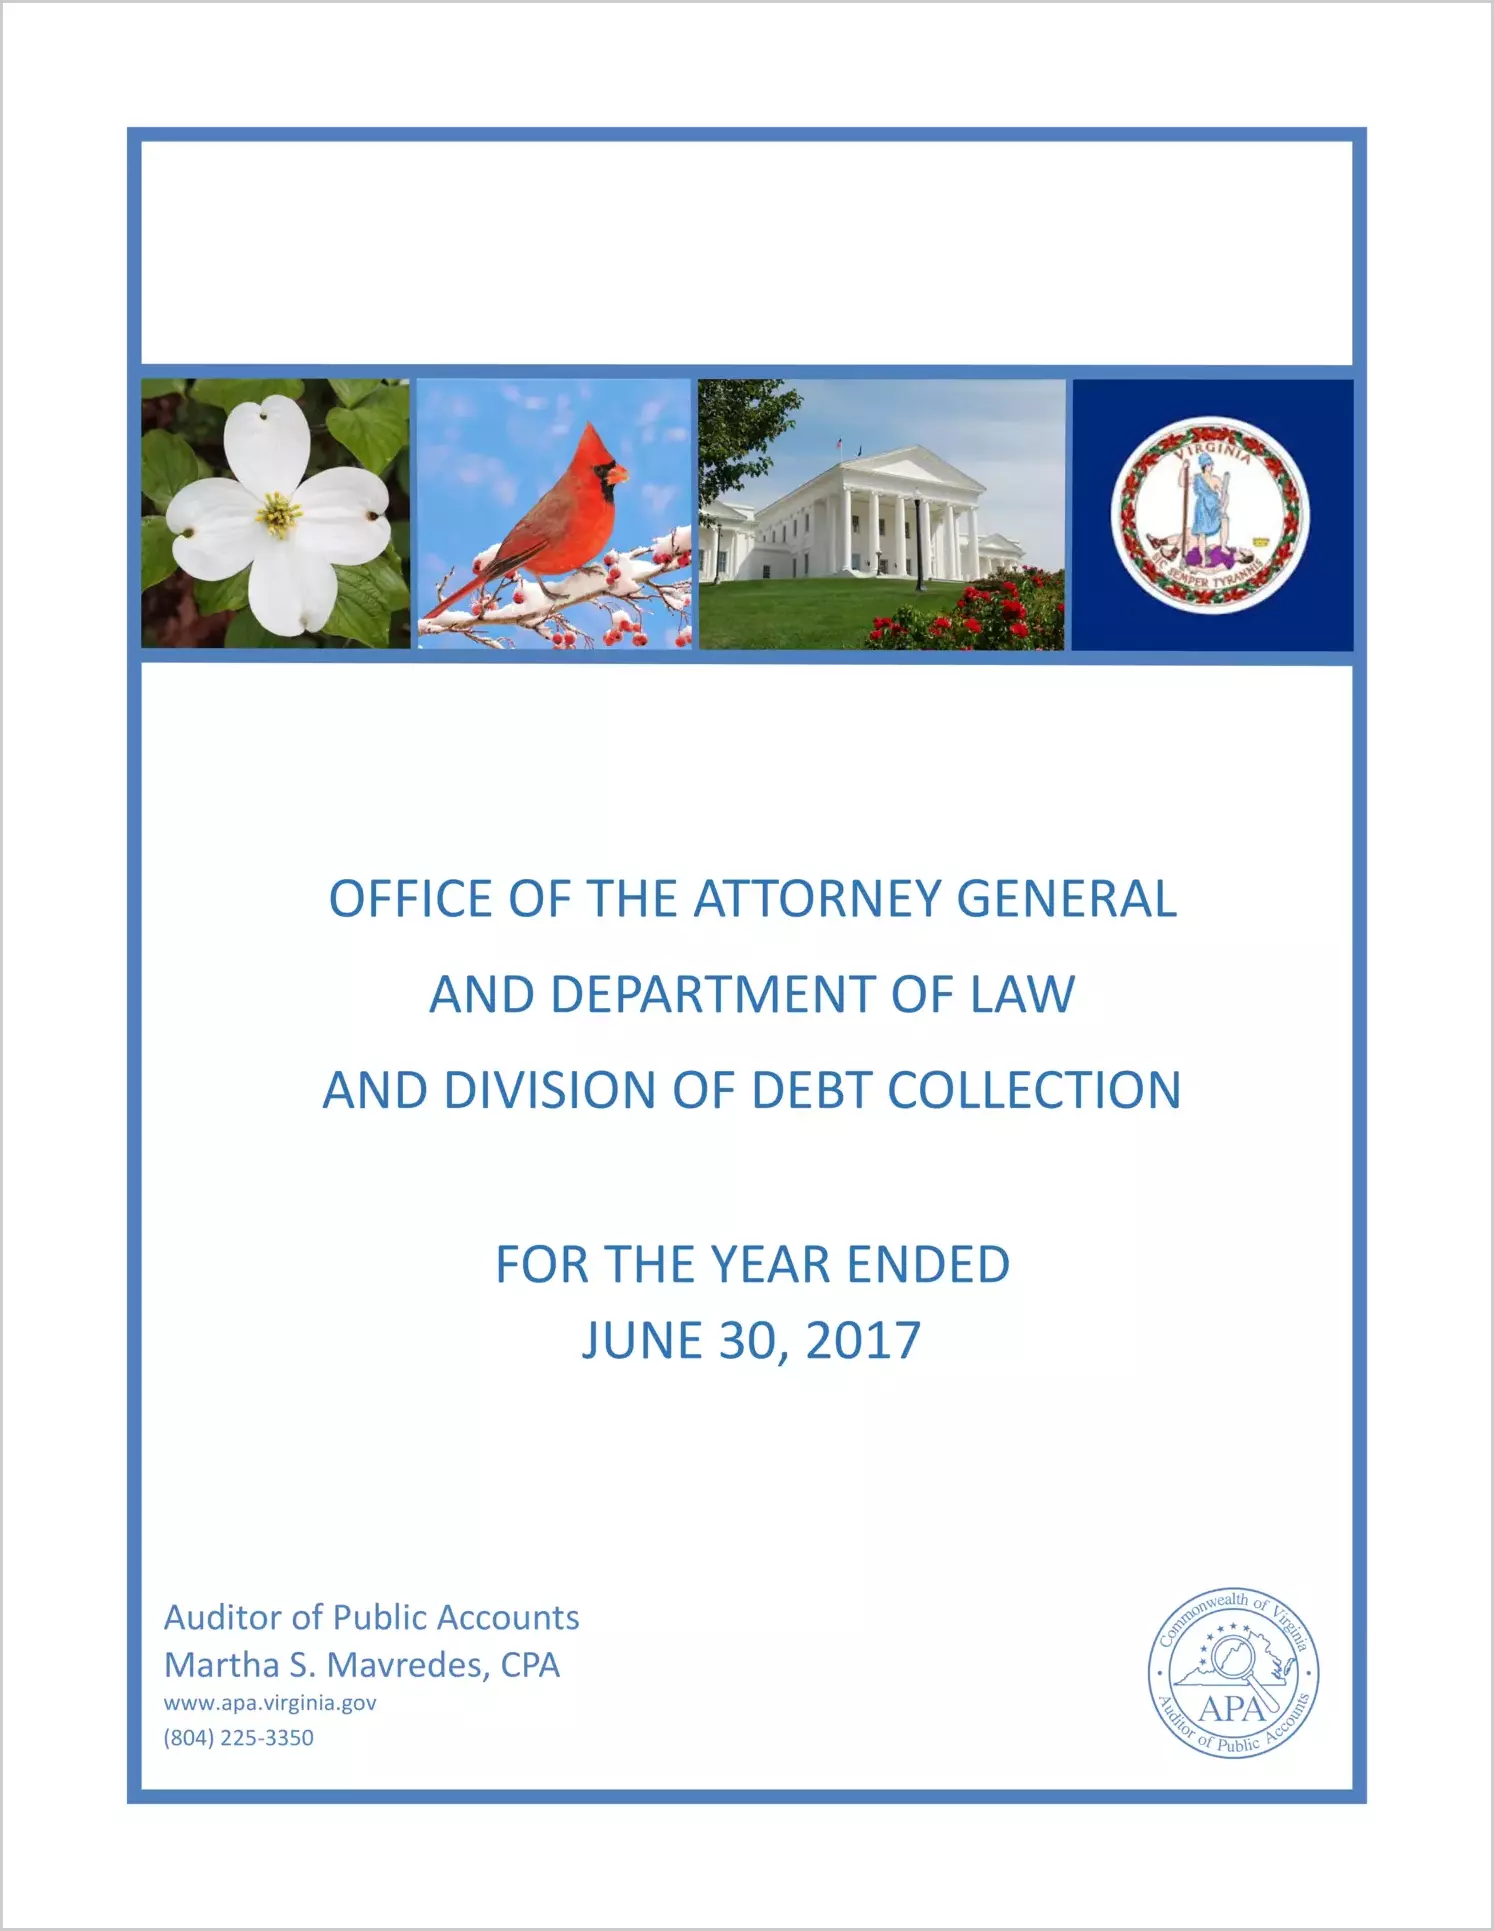 Office of the Attorney General and Department of Law and Division of Debt Collection for the year ended June 30, 2017